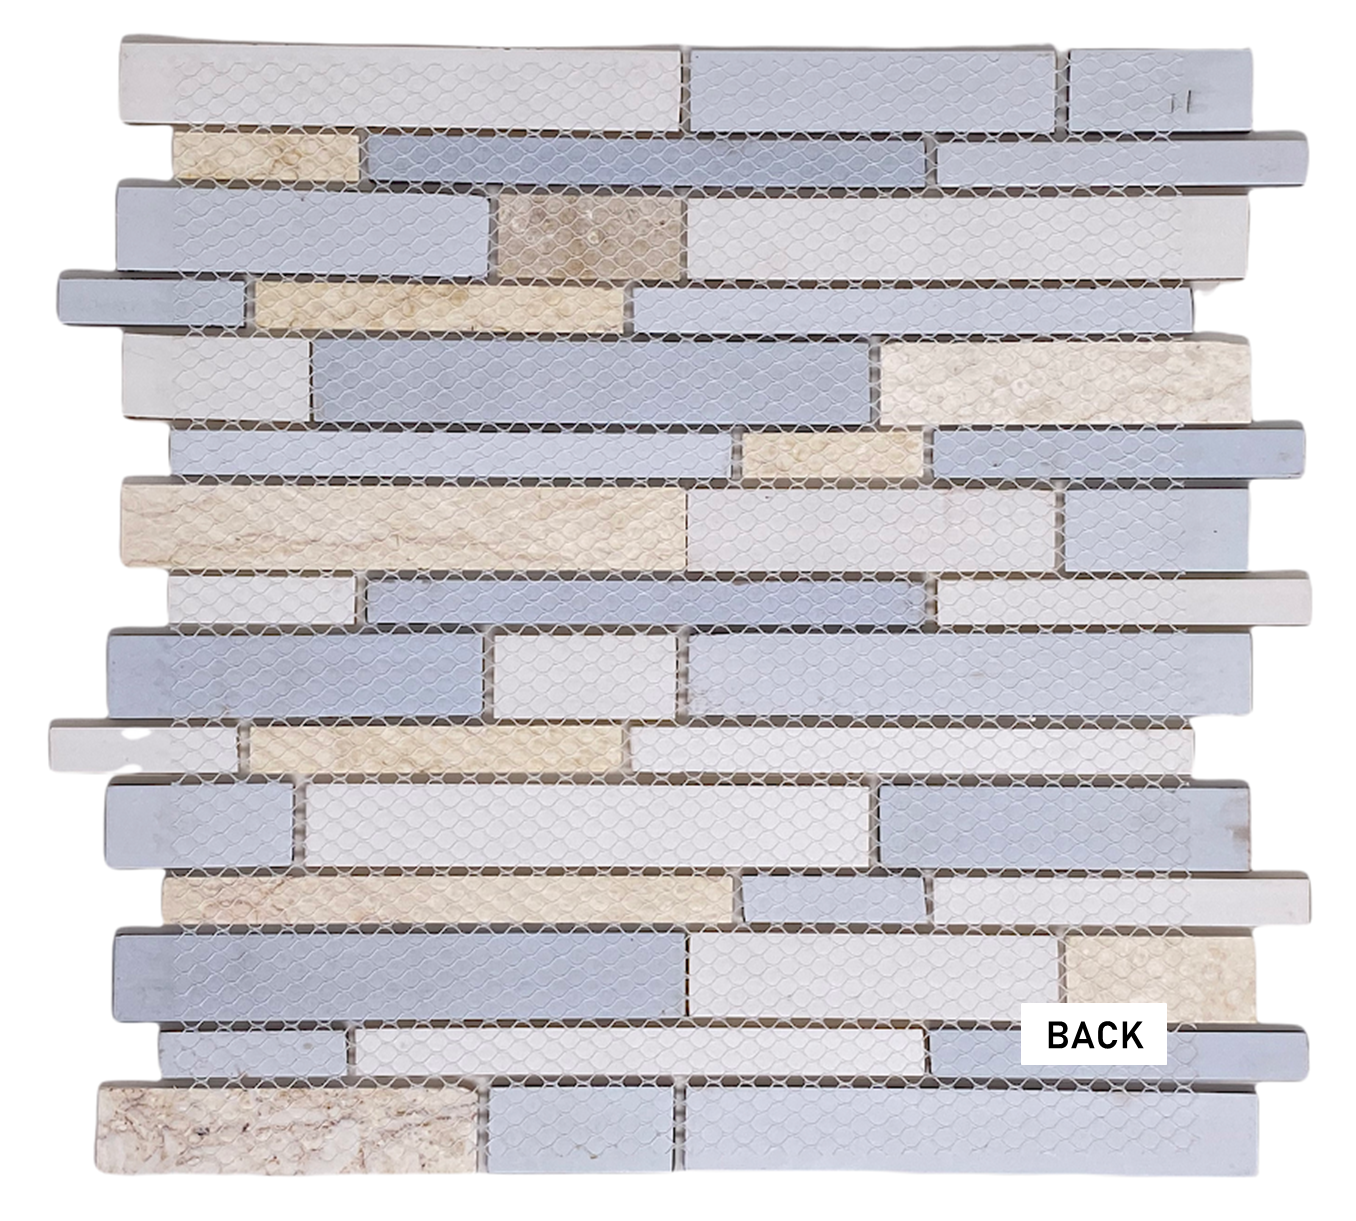 MSI Sonoma Valley ‎AMZ-MD-00363 Interlocking Stone 12 inch x 12 inch Wall Tile for Kitchen Backsplash, Wall Tile for Bathroom, Shower Wall Tile, Mesh Mounted Mosaic Tile